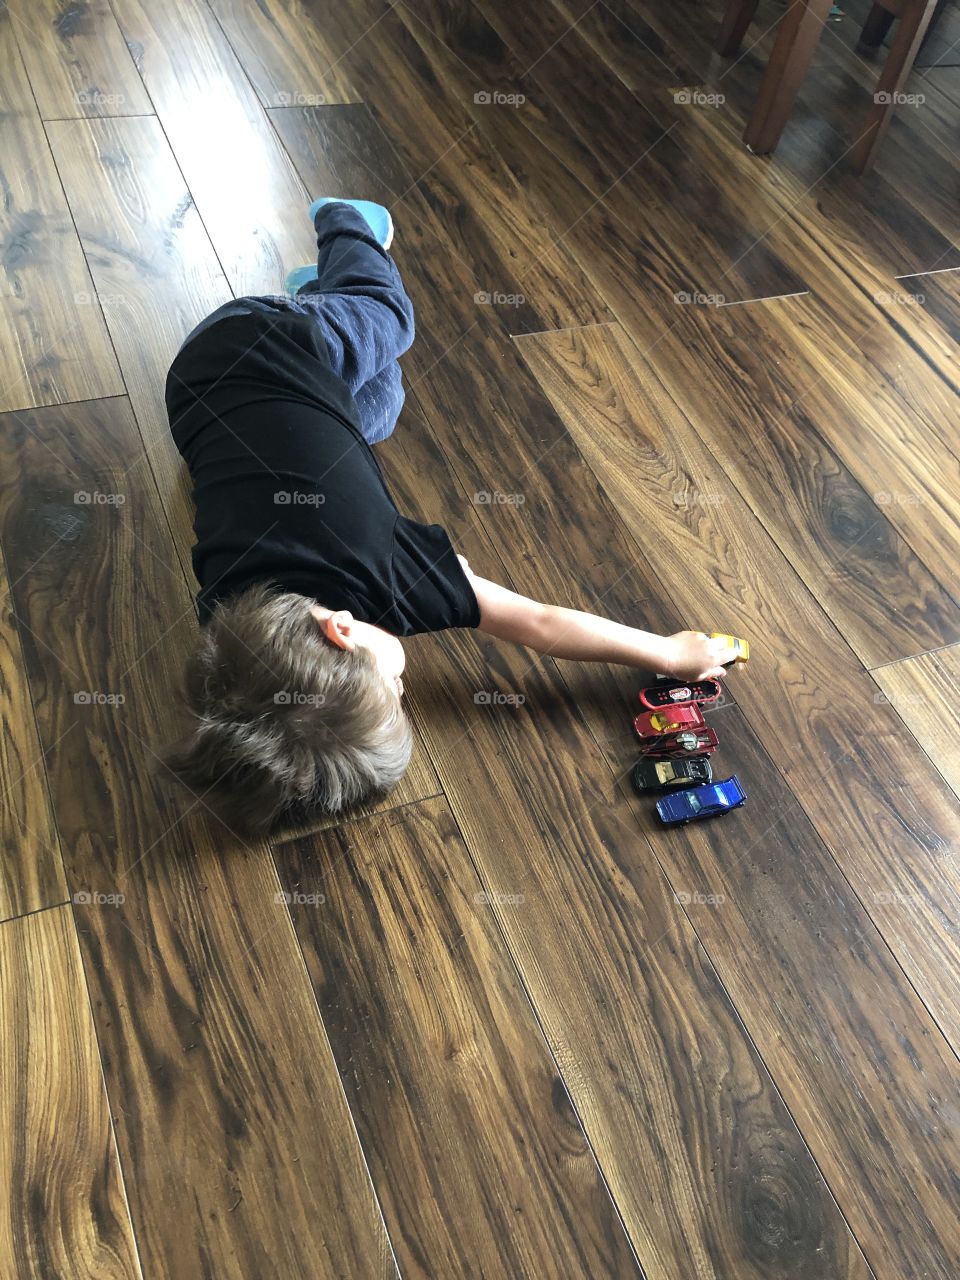 Toddler playing on floor with cars II